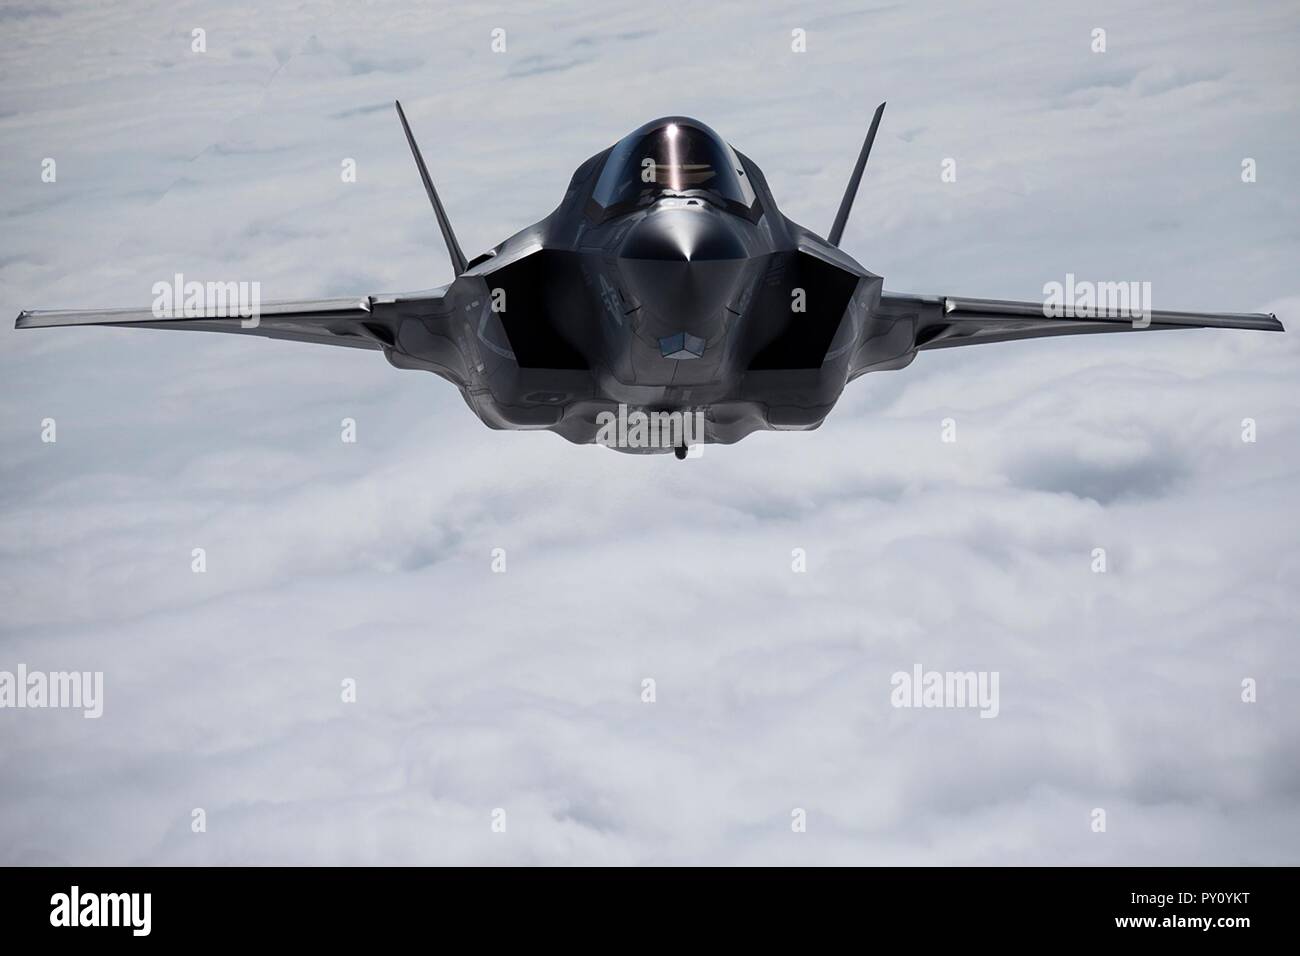 A U.S. Marine Corps F-35B Lightning II stealth fighter aircraft approaches a KC-130J tanker aircraft during an aerial refueling October 23, 2018 above the East China Sea. Stock Photo